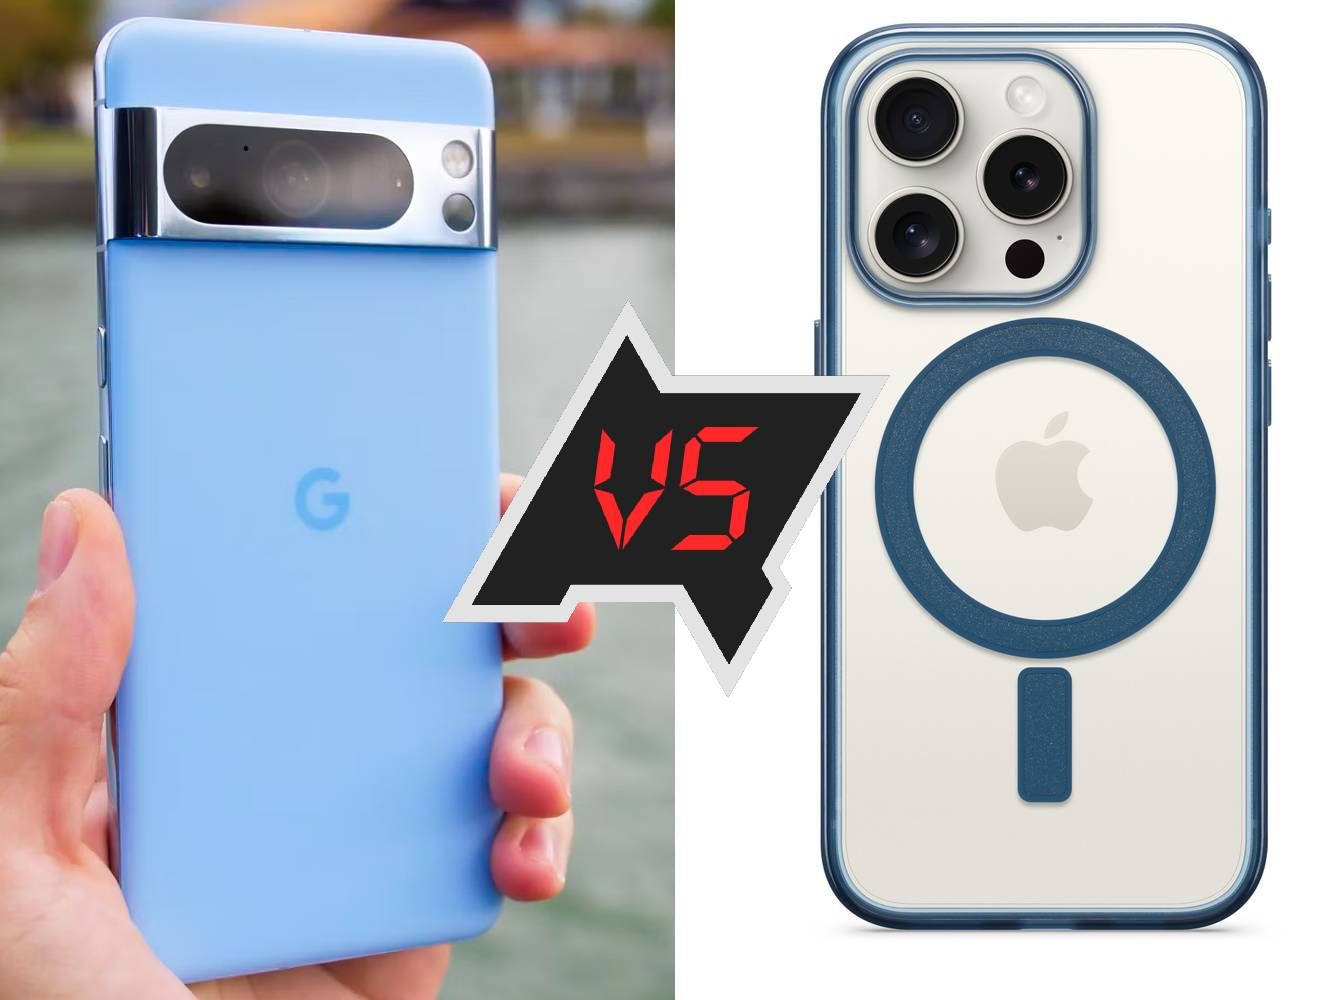 The Google Pixel 8 Pro in Bay blue compared to the iPhone 15 Pro in a licensed OtterBox case